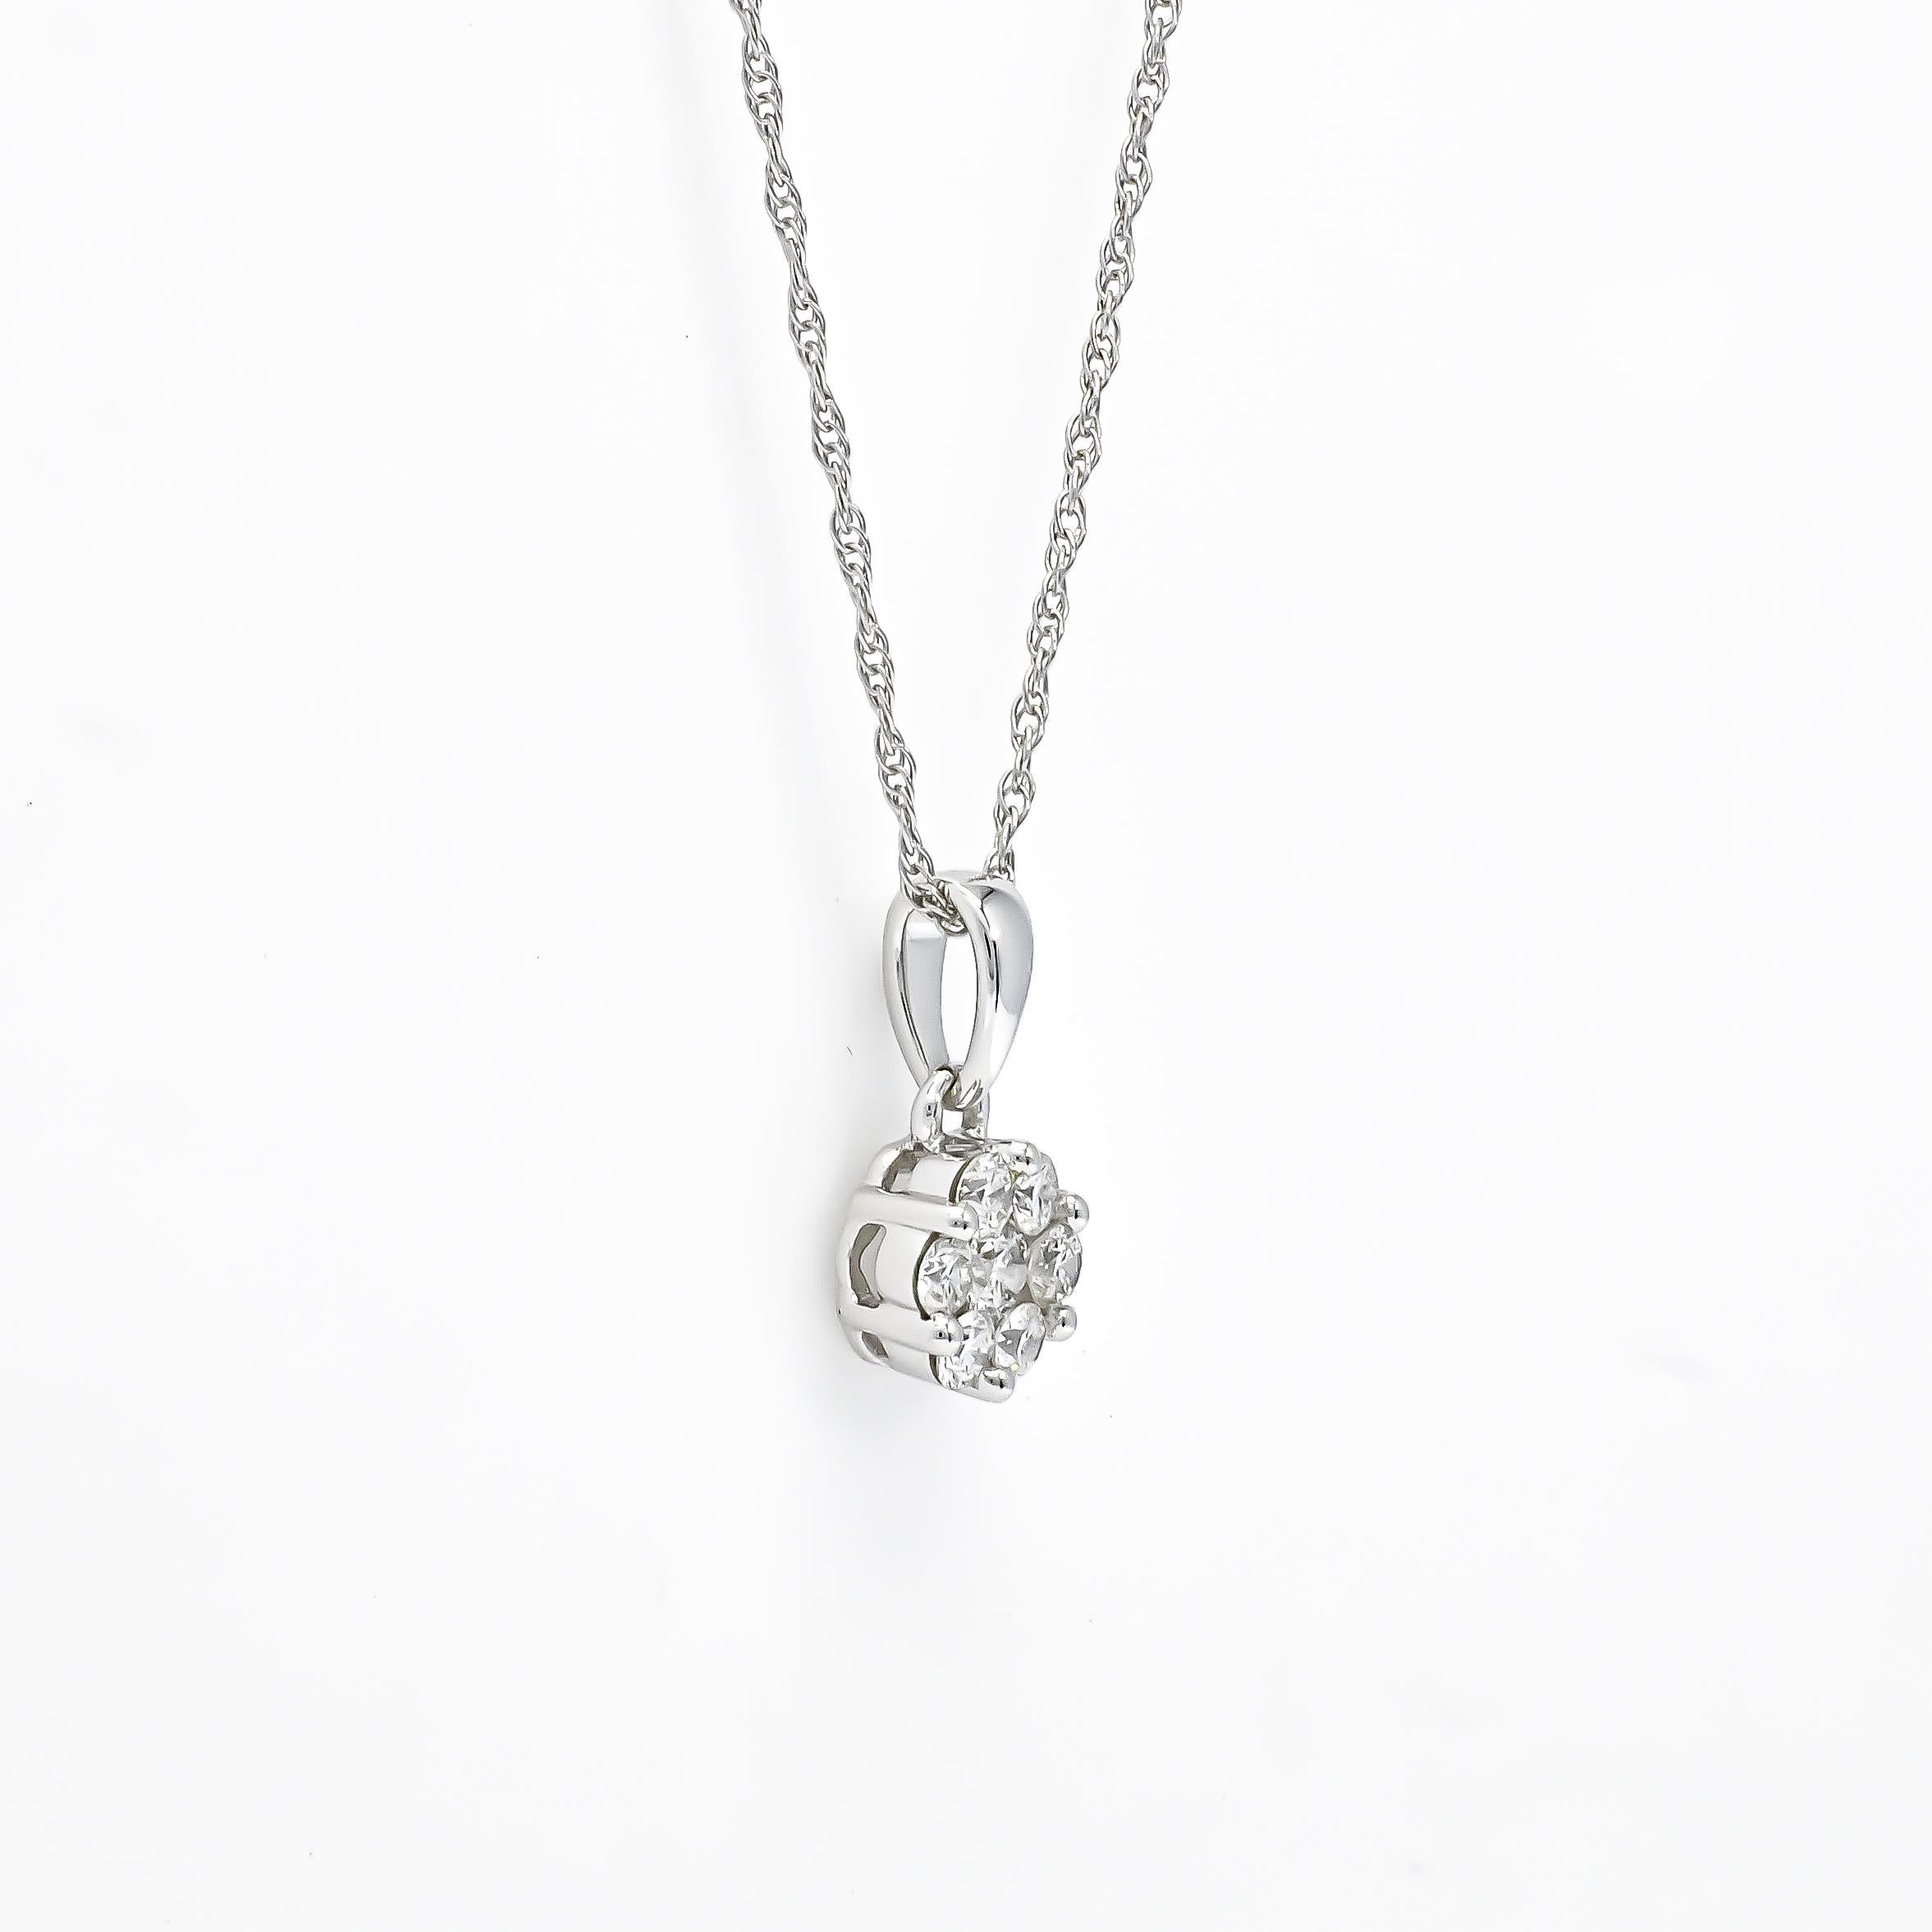 The design of this pendant necklace seamlessly blends classic charm with contemporary aesthetics, making it a versatile piece that can effortlessly elevate both casual and formal ensembles. 

Whether worn as a statement piece for a special occasion